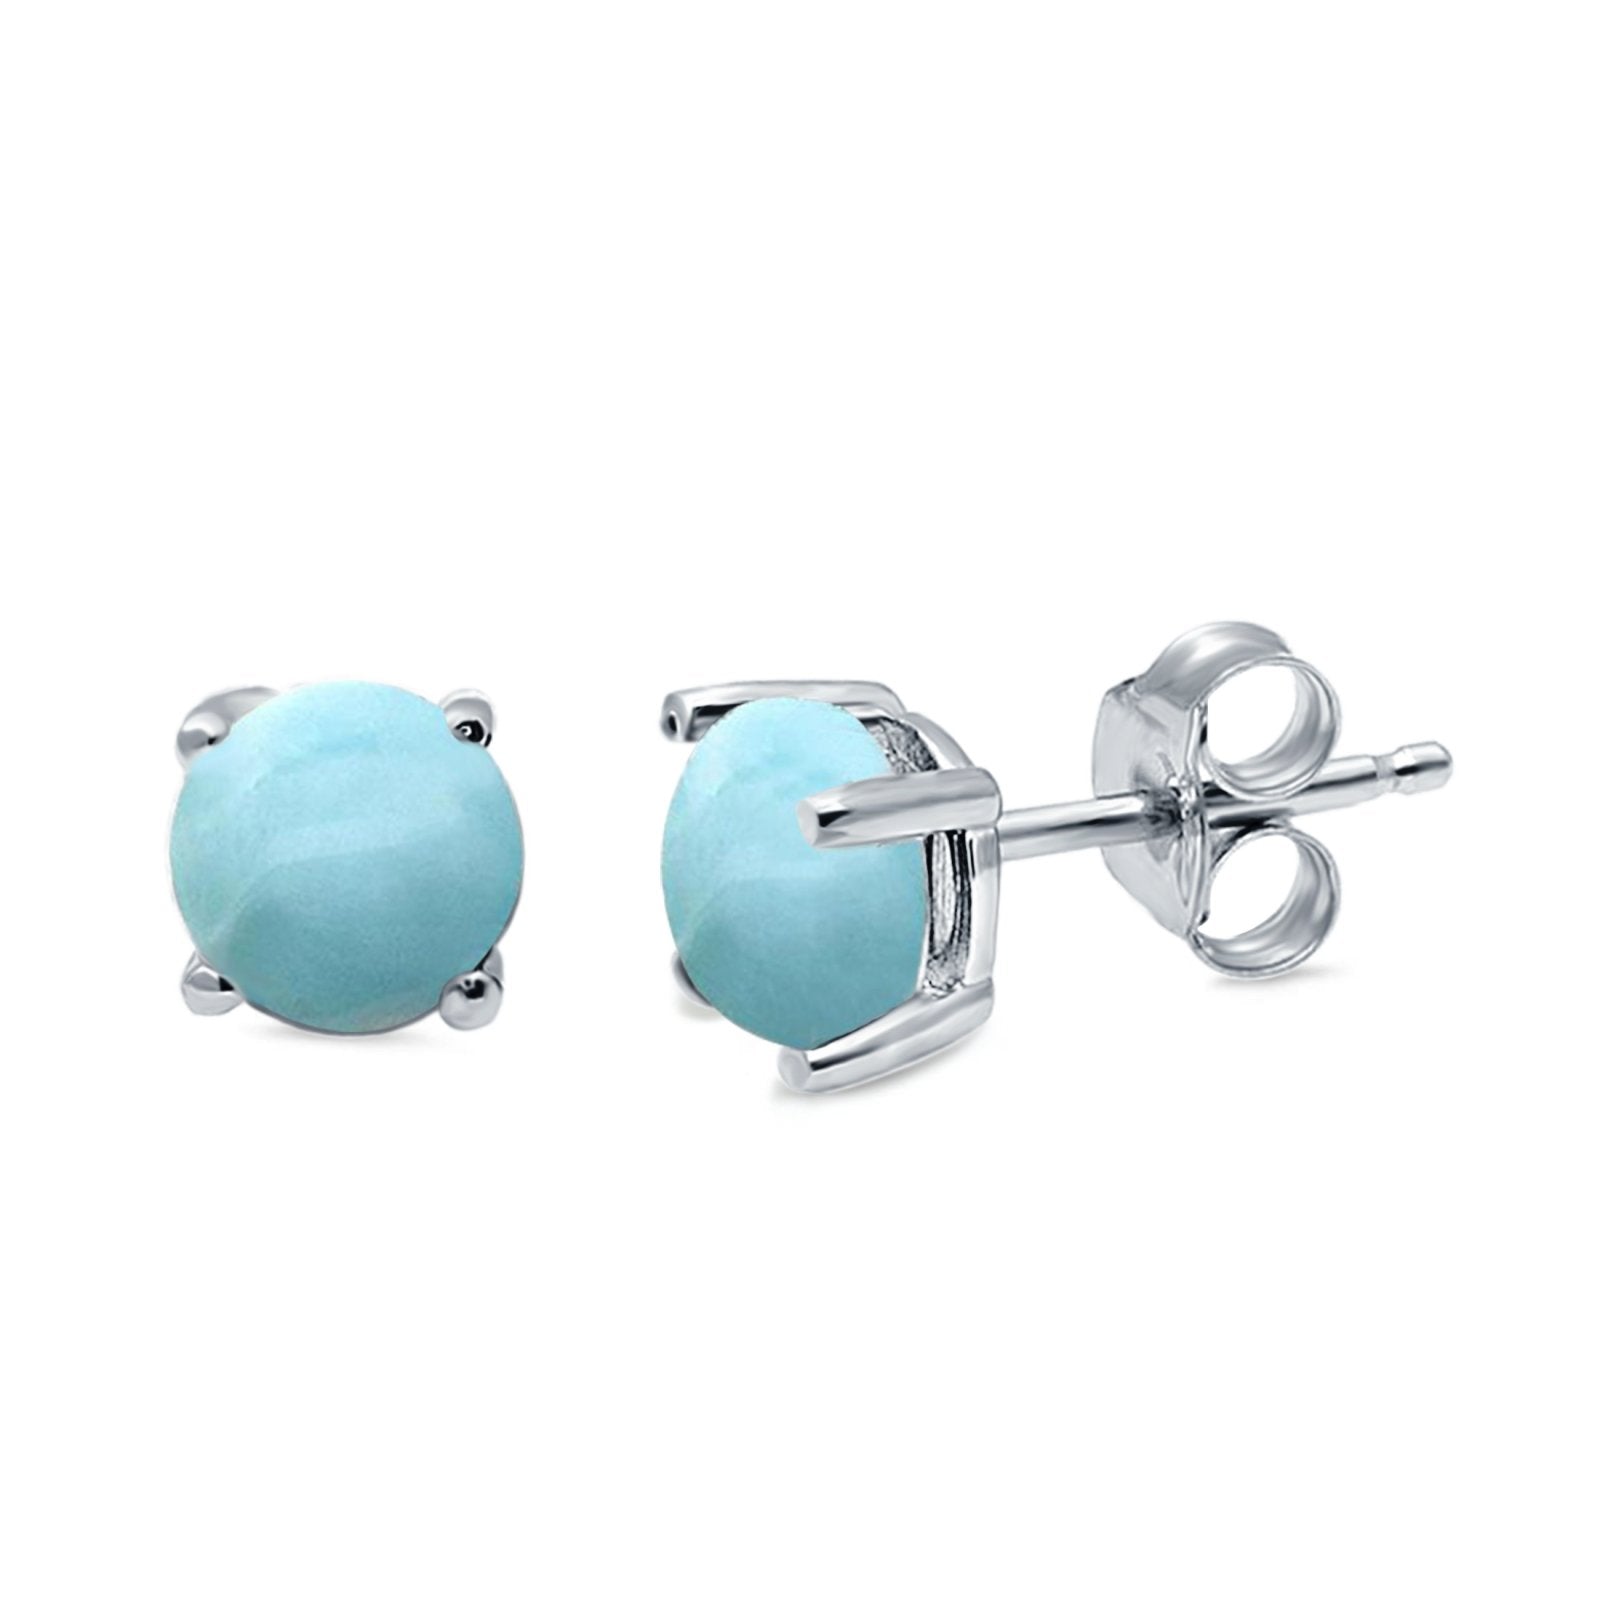 Round Natural Larimar CZ Stud Earrings 925 Sterling Silver 3MM-10MM